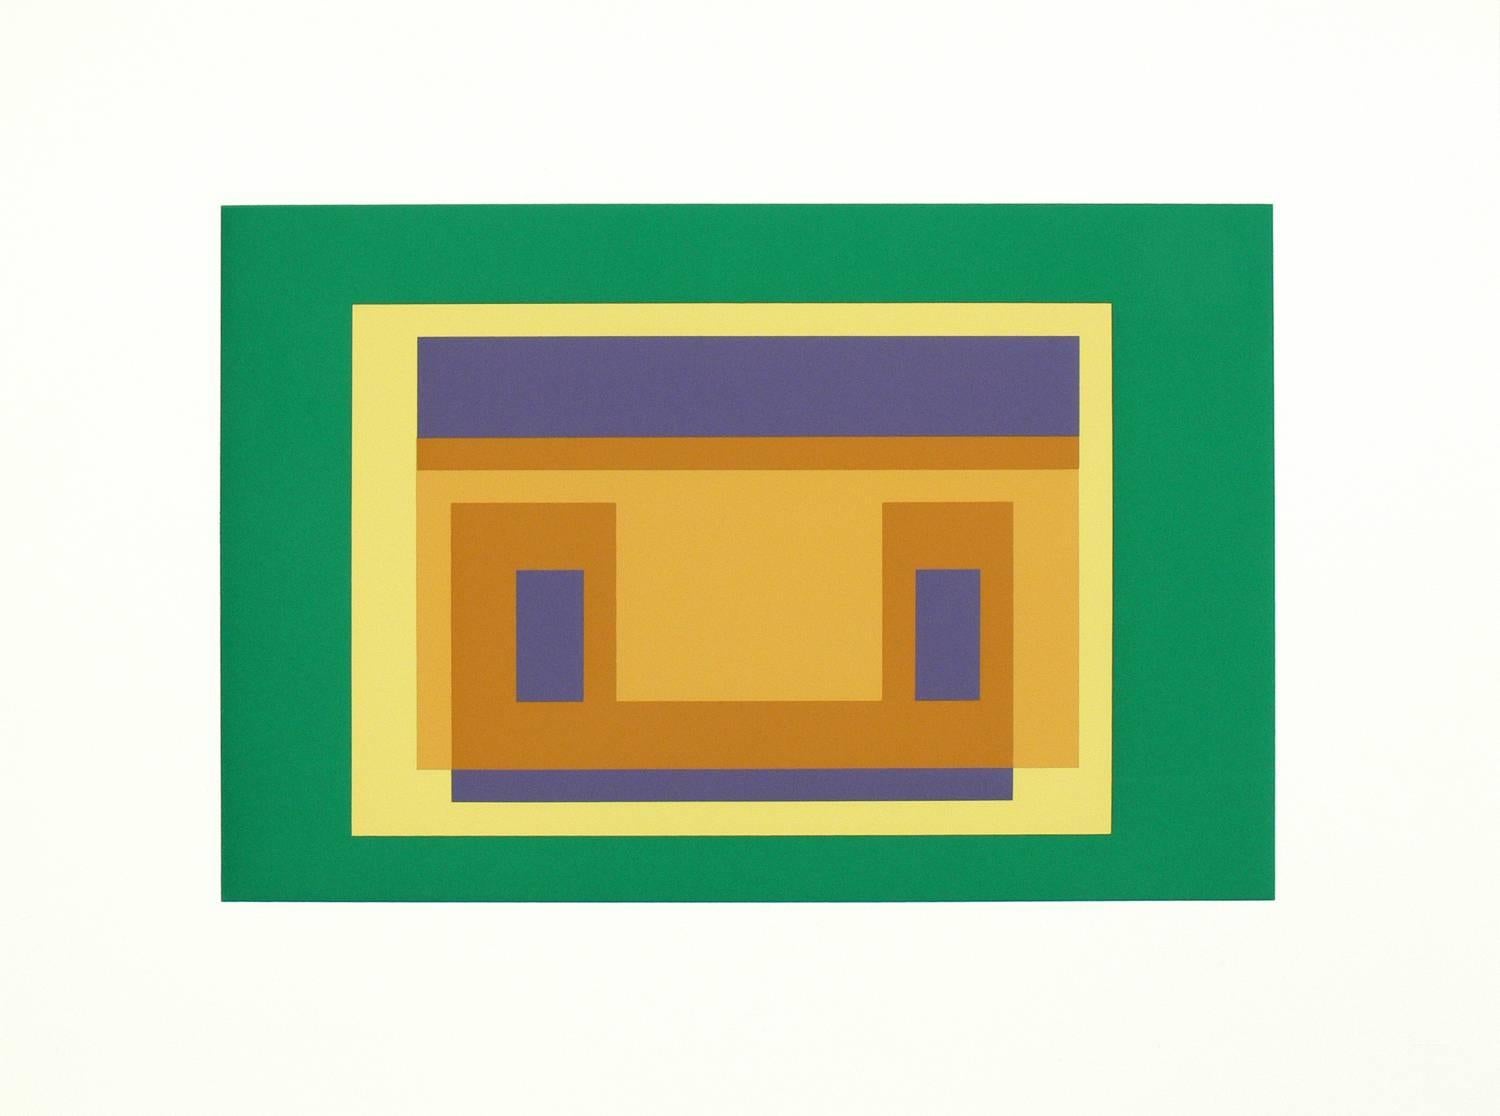 Pair of Josef Albers lithographs from Formulation and Articulation, published by Harry N. Abrams Inc., New York, and Ives Sillman Inc., New Haven, circa 1972. Unsigned edition of 1000. These two works are from Portfolio II, Folder 29. They have been